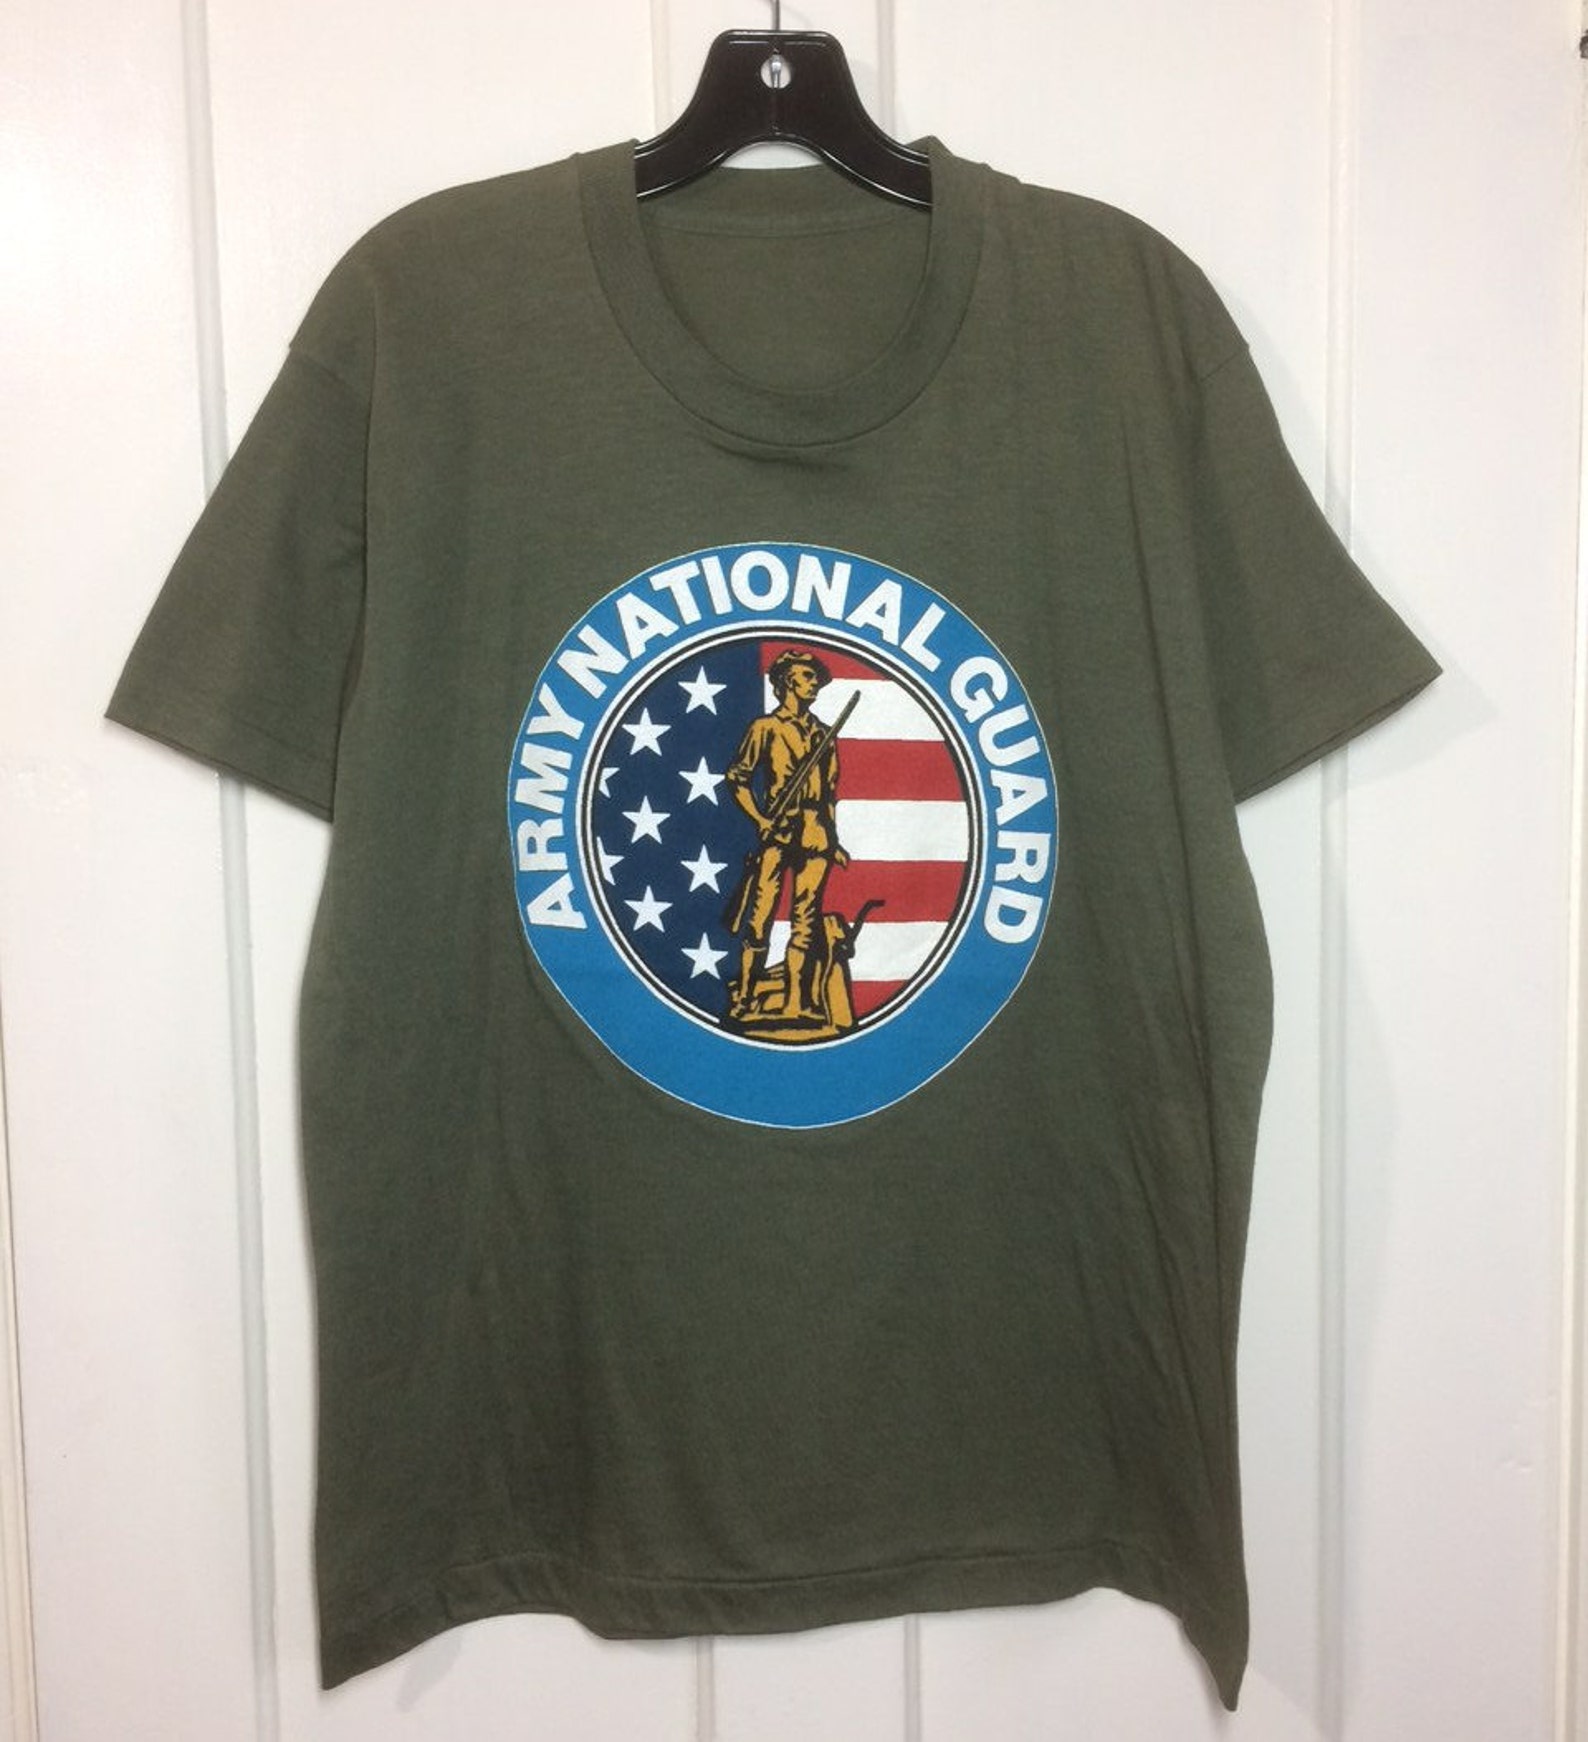 1980s US Army National Guard T-shirt Looks Size Large 21x26.5 - Etsy